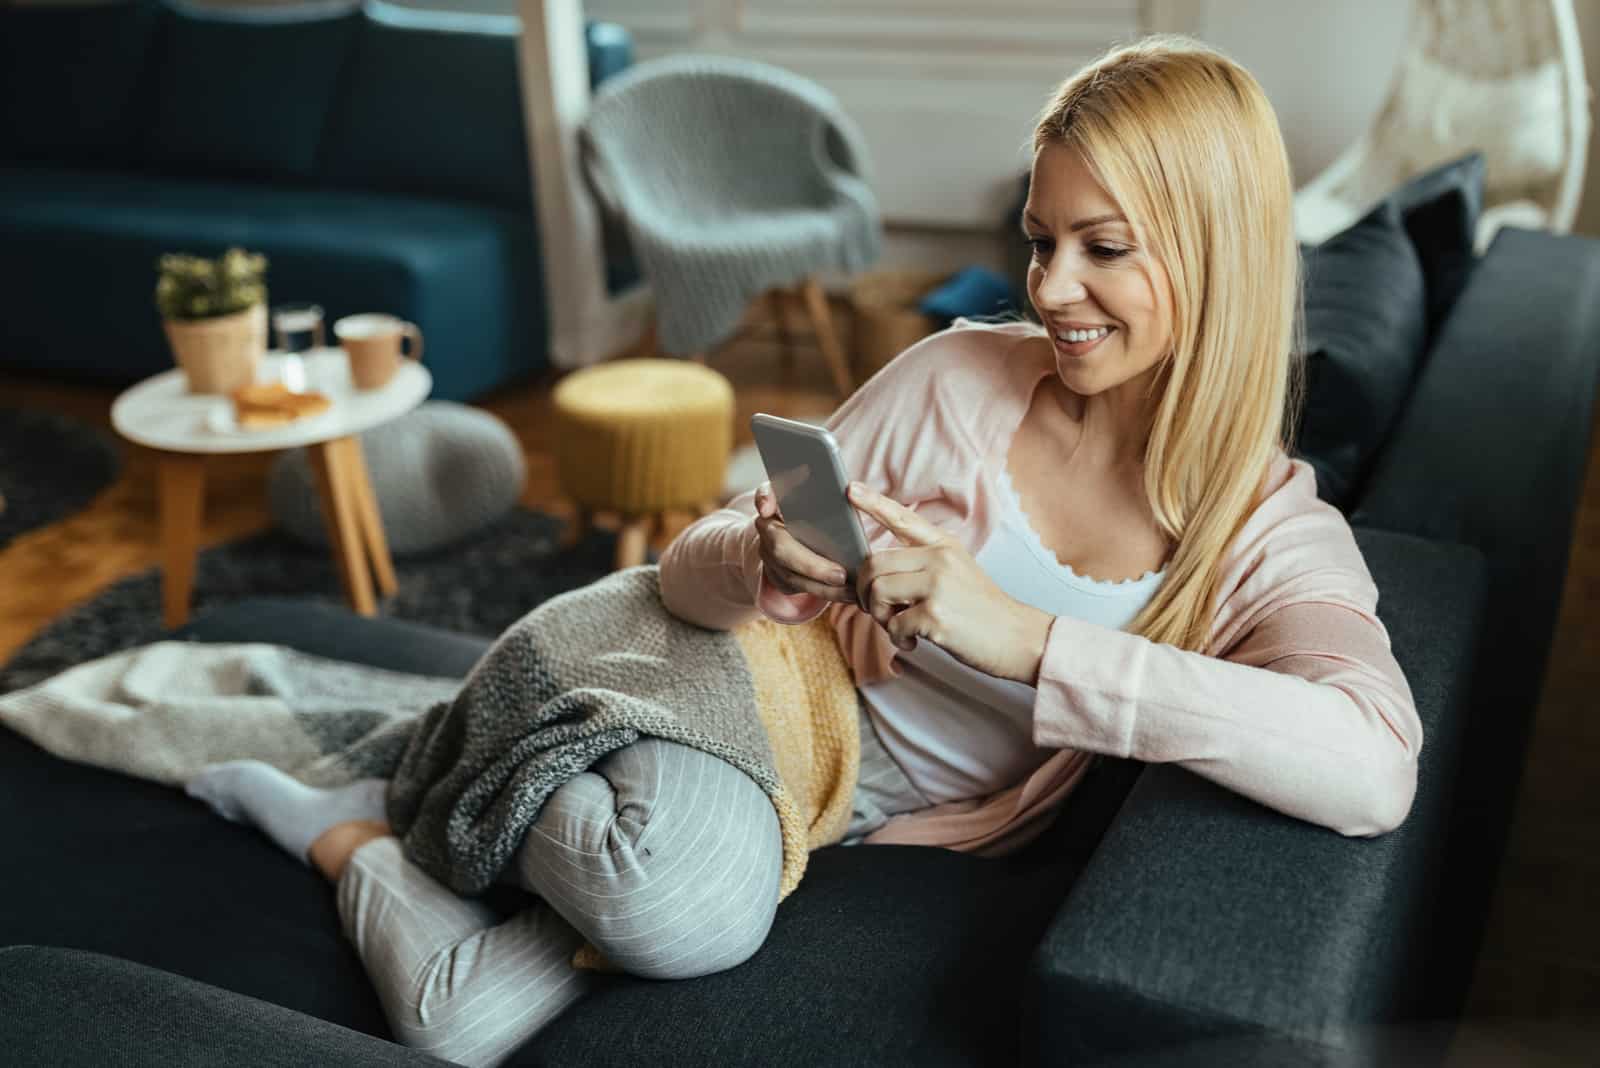 a woman with long blonde hair sits on the couch and holds the phone in her hand